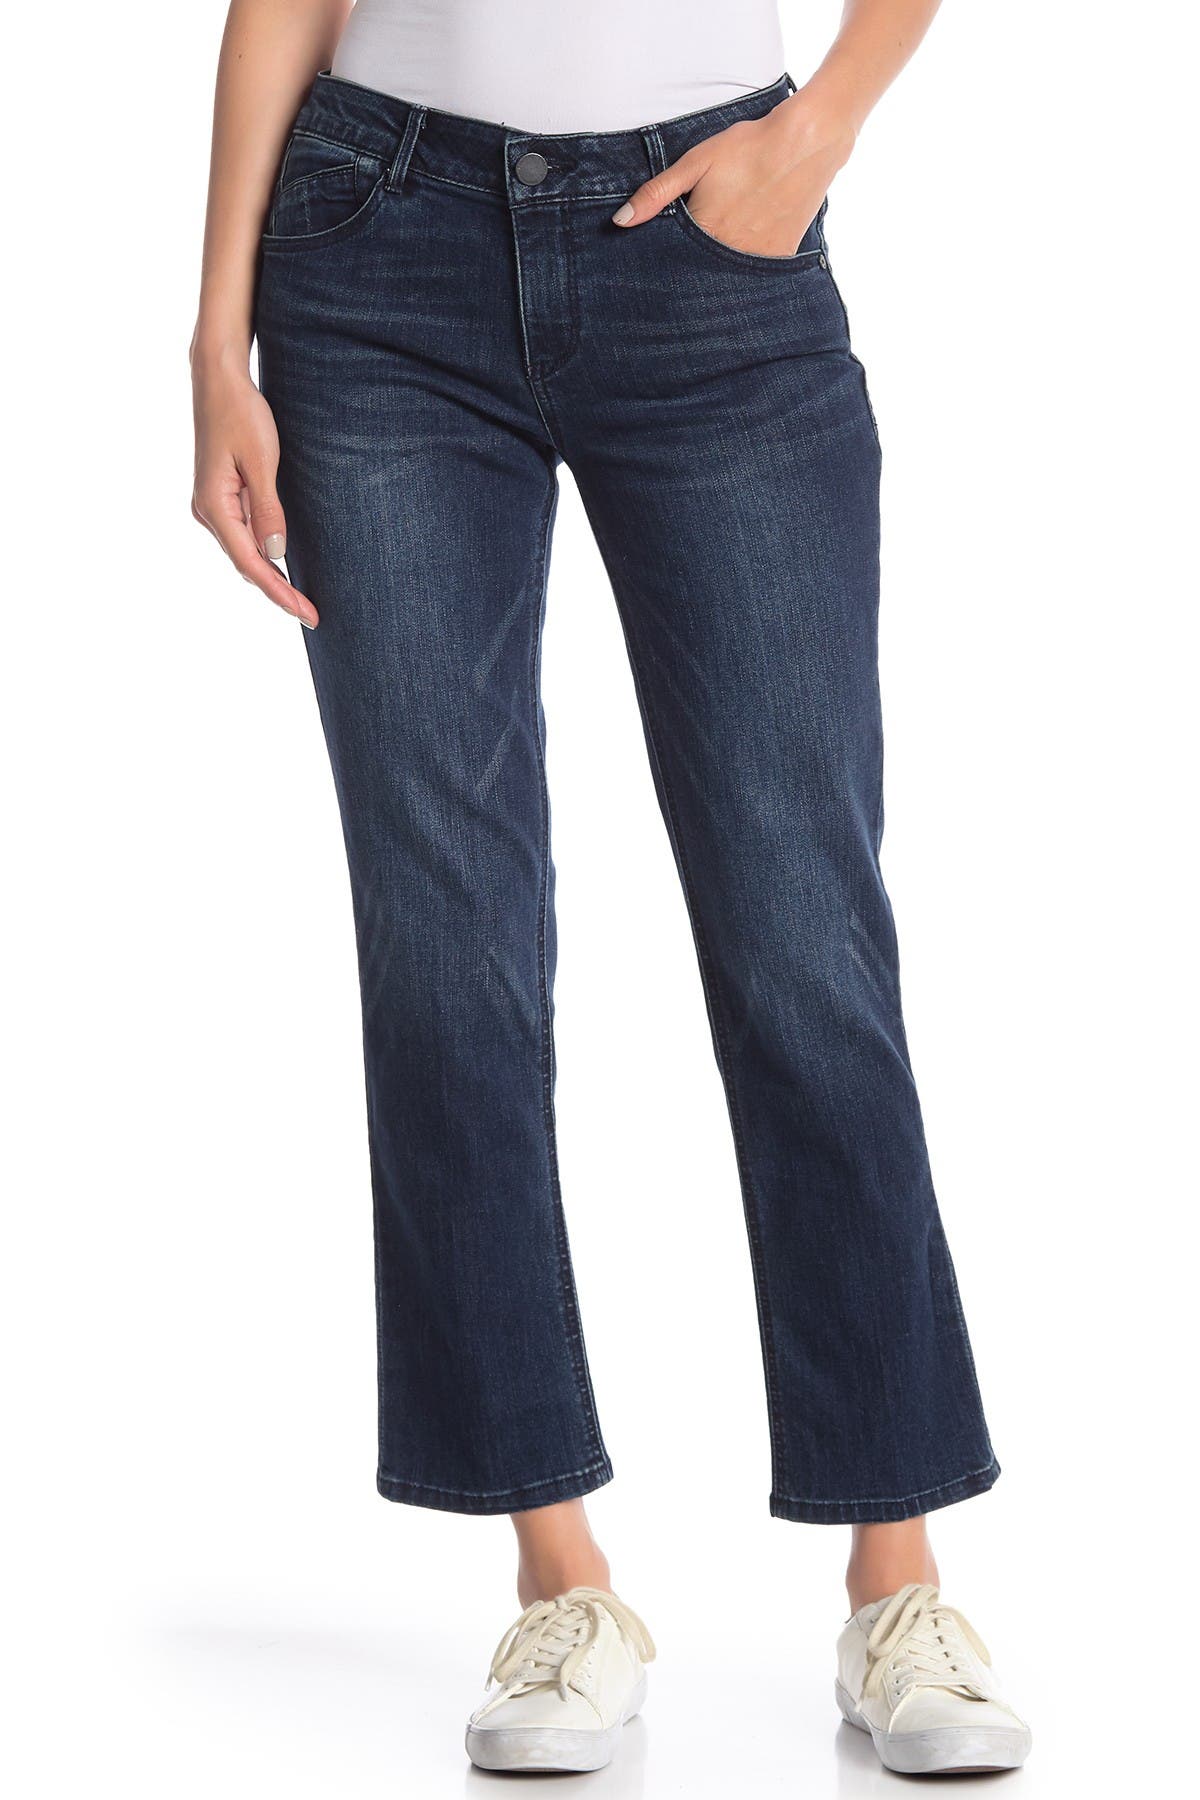 democracy cropped jeans